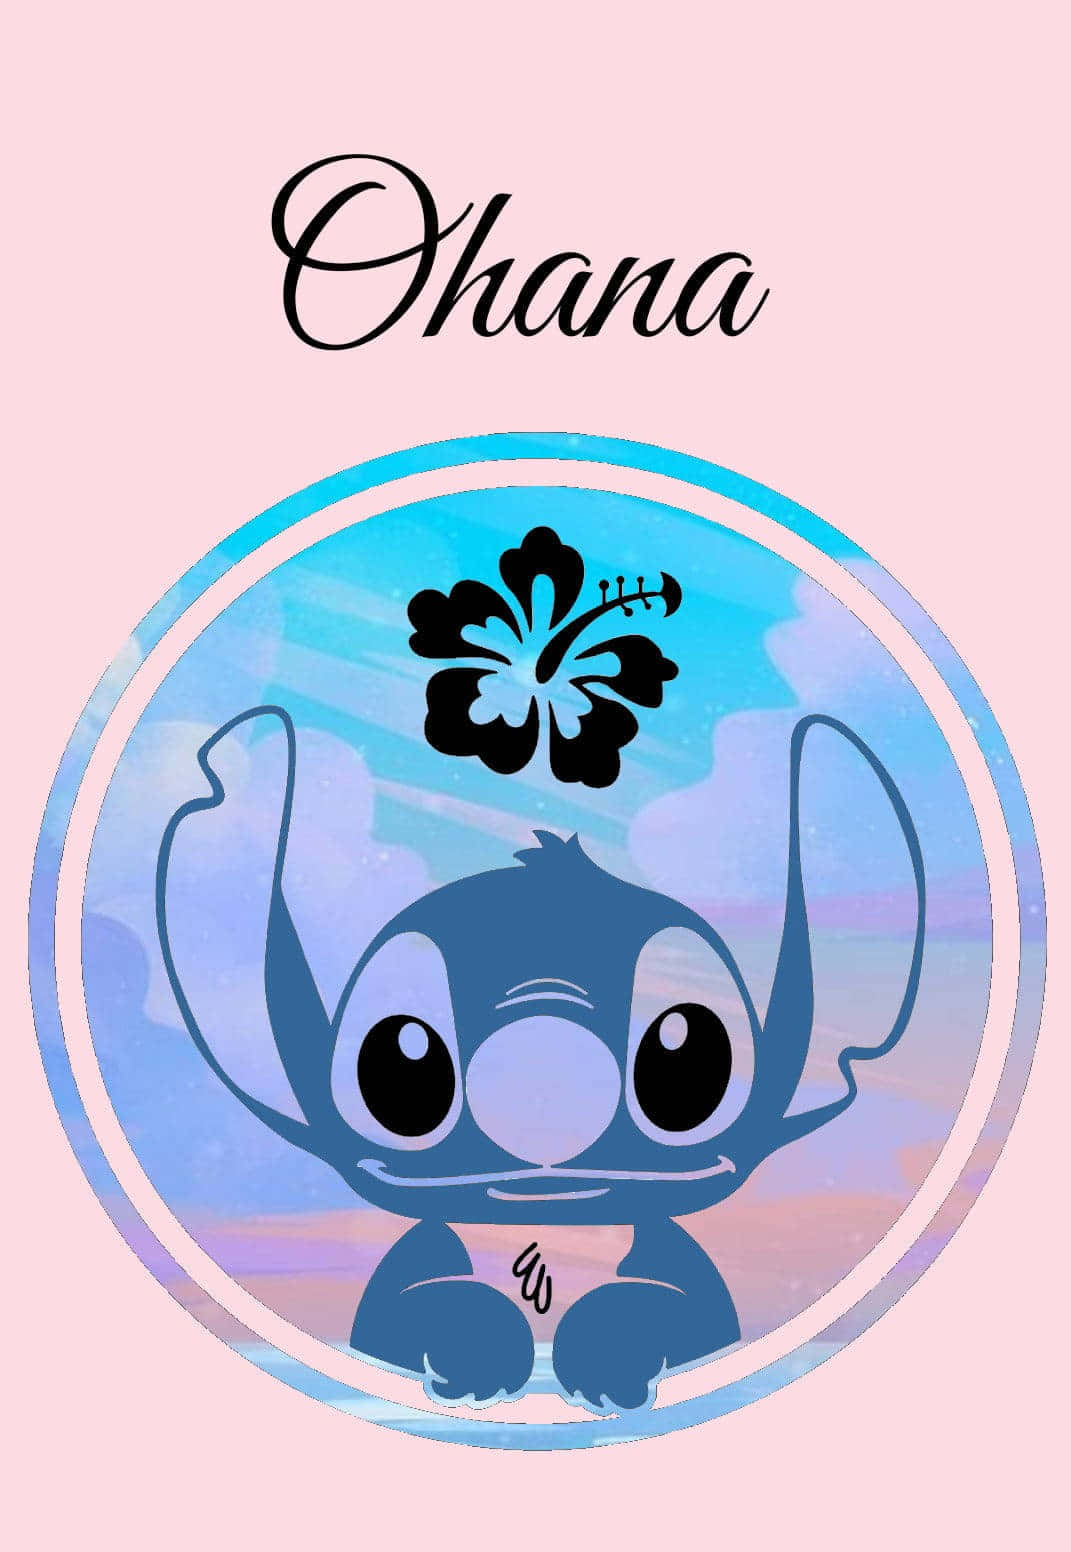 [200+] Cute Stitch Pictures | Wallpapers.com